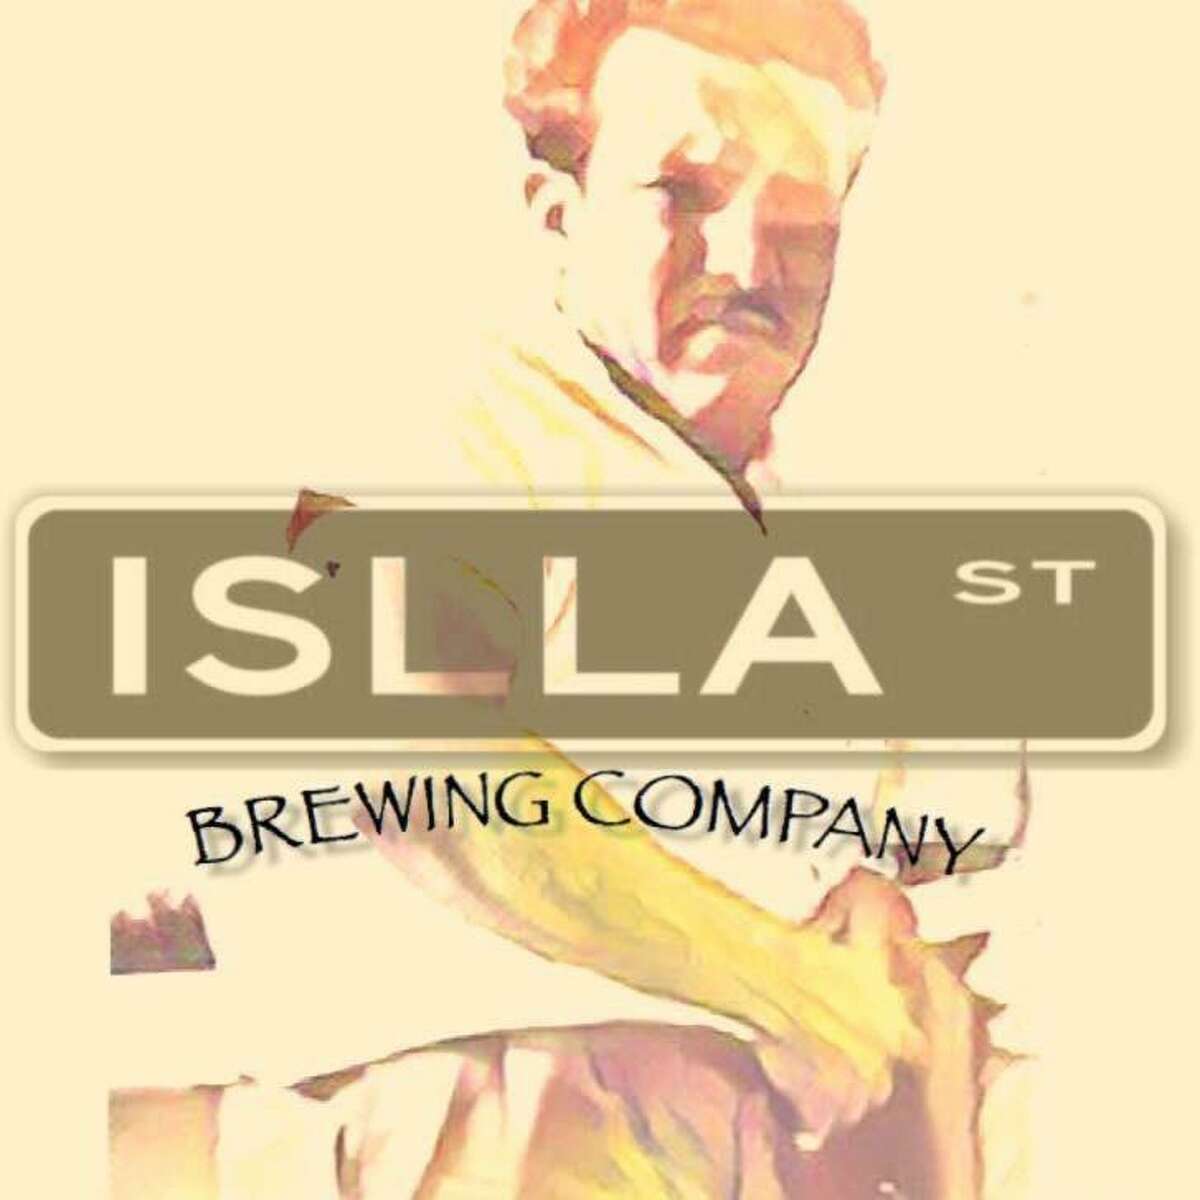 The Islla St. Brewing Co. logo, highlighting the owners' grandfather Ricardo Peña.